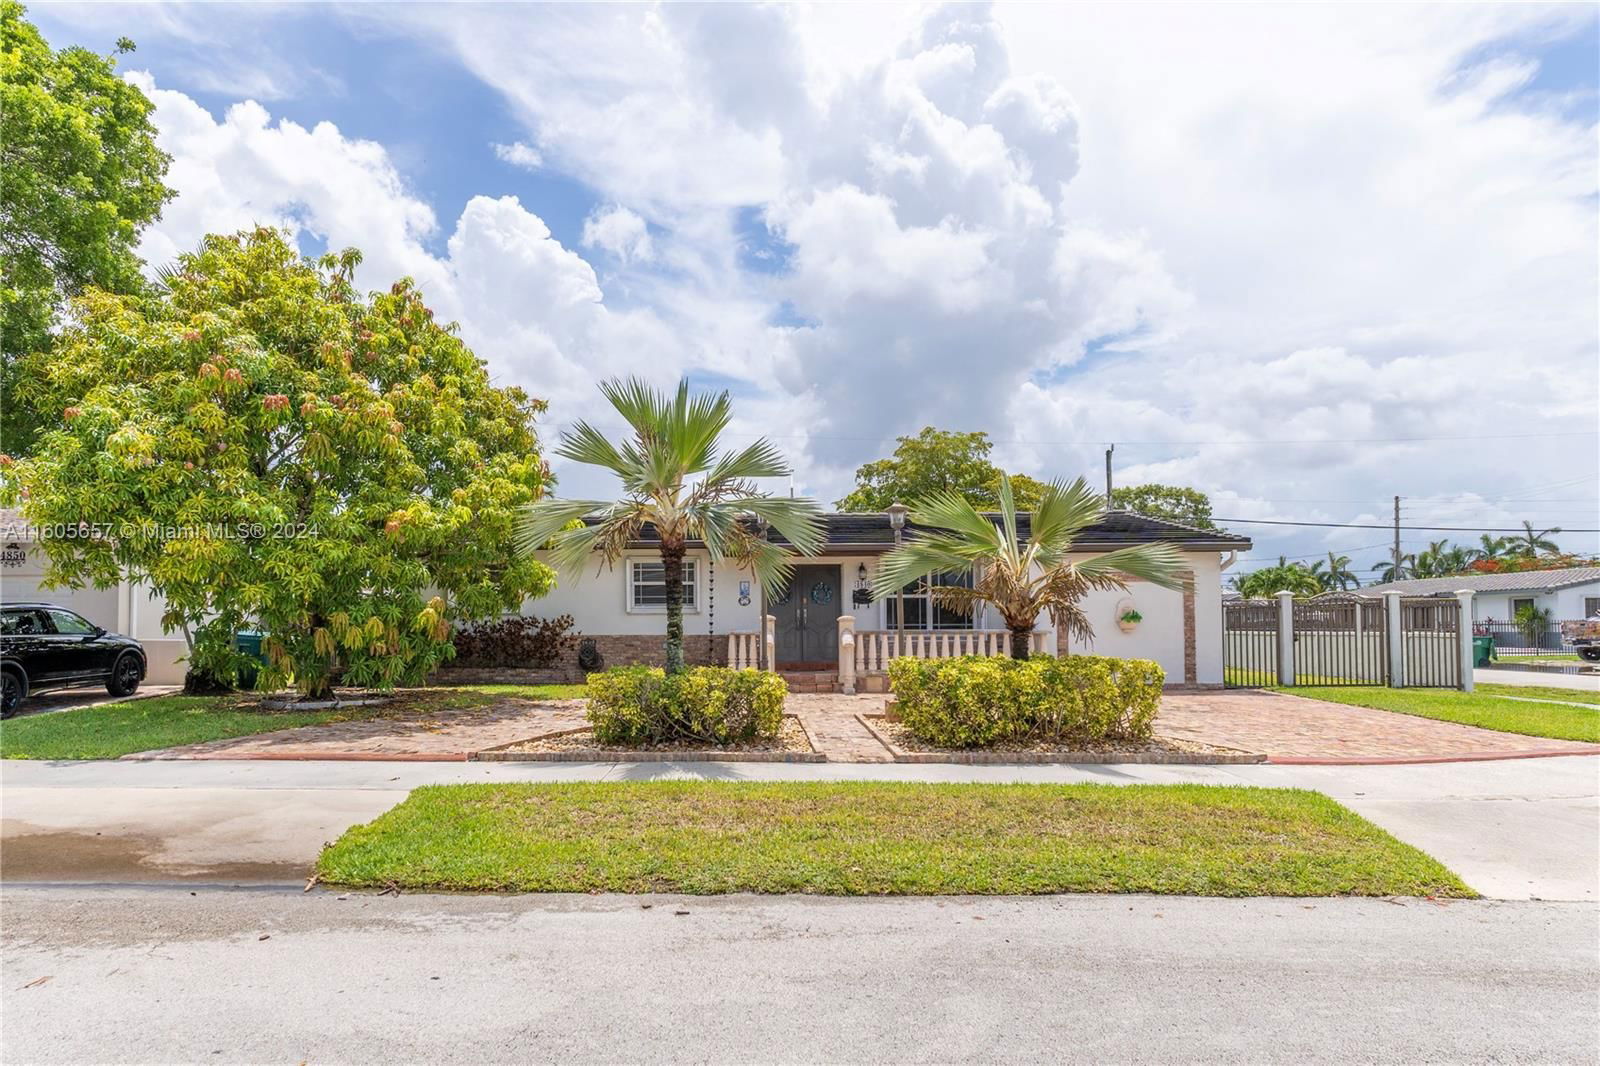 Real estate property located at 4840 91st Ave., Miami-Dade County, MILLER HEIGHTS SEC 2, Miami, FL